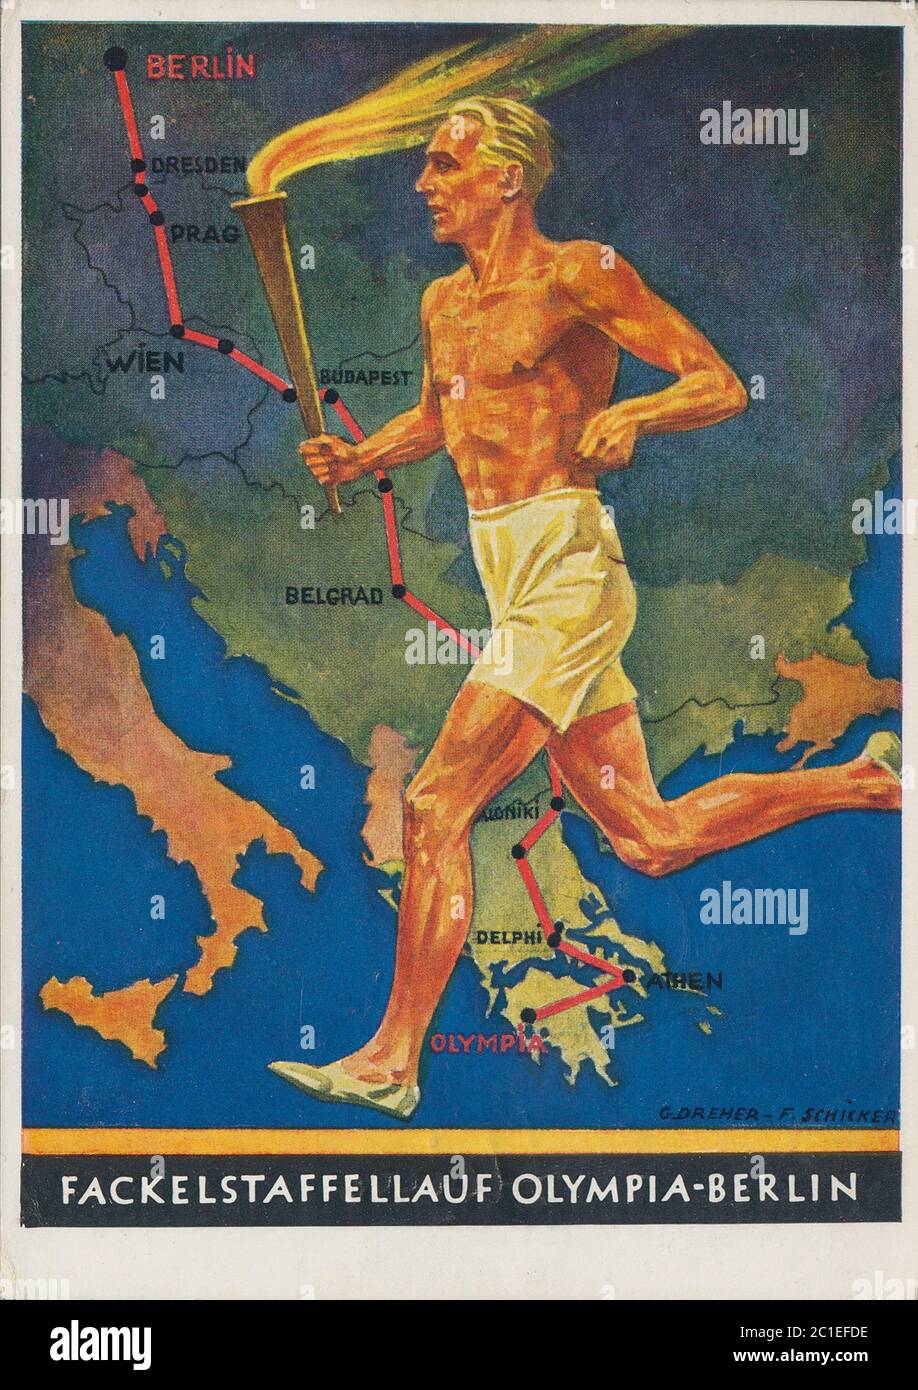 The 1936 Summer Olympics, officially known as the Games of the XI Olympiad (German: Spiele der XI. Olympiade), was an international multi-sport event Stock Photo